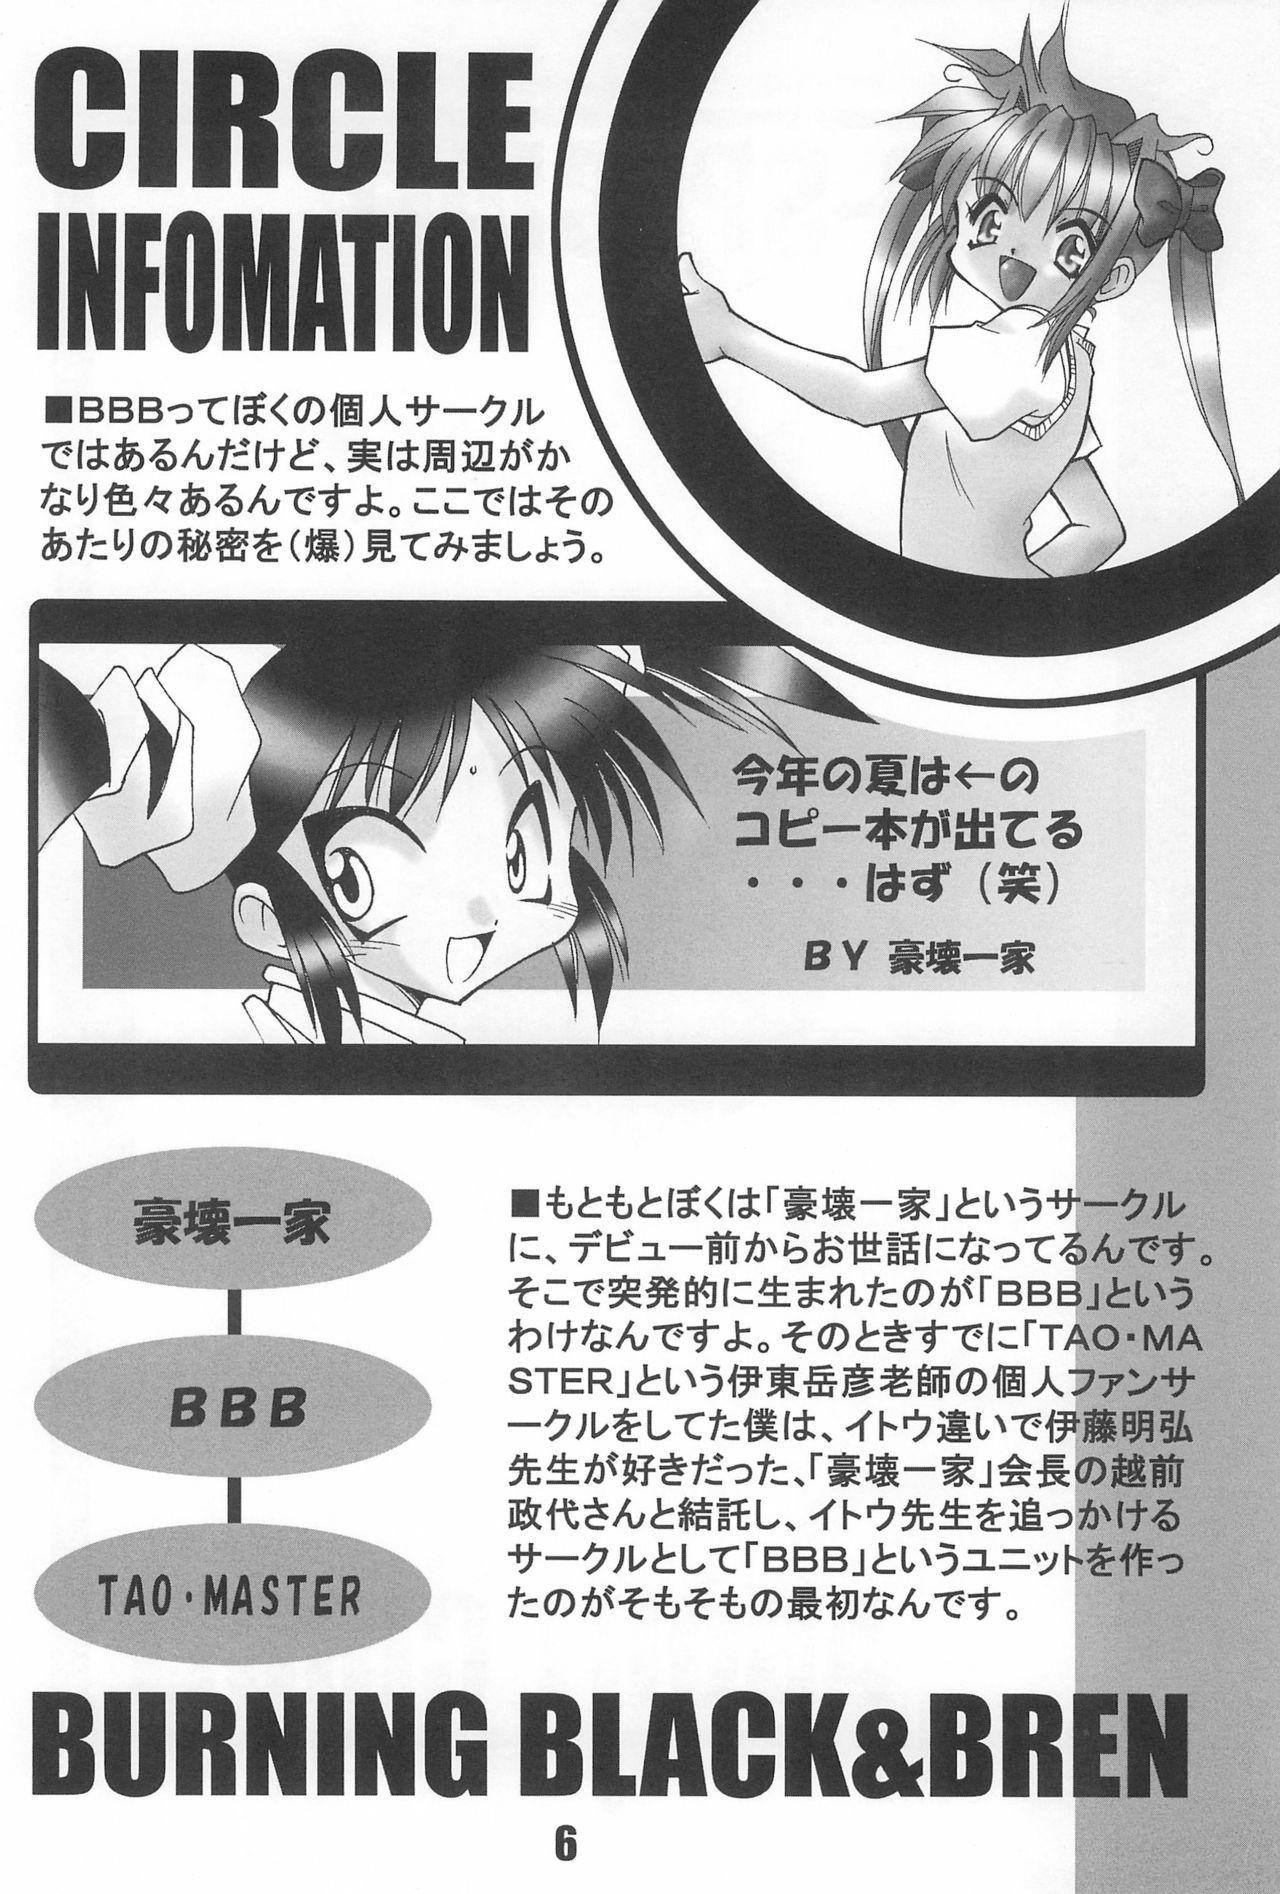 Student BBB OFFICIAL GUIDE BOOK - Cardcaptor sakura Assfucked - Page 6